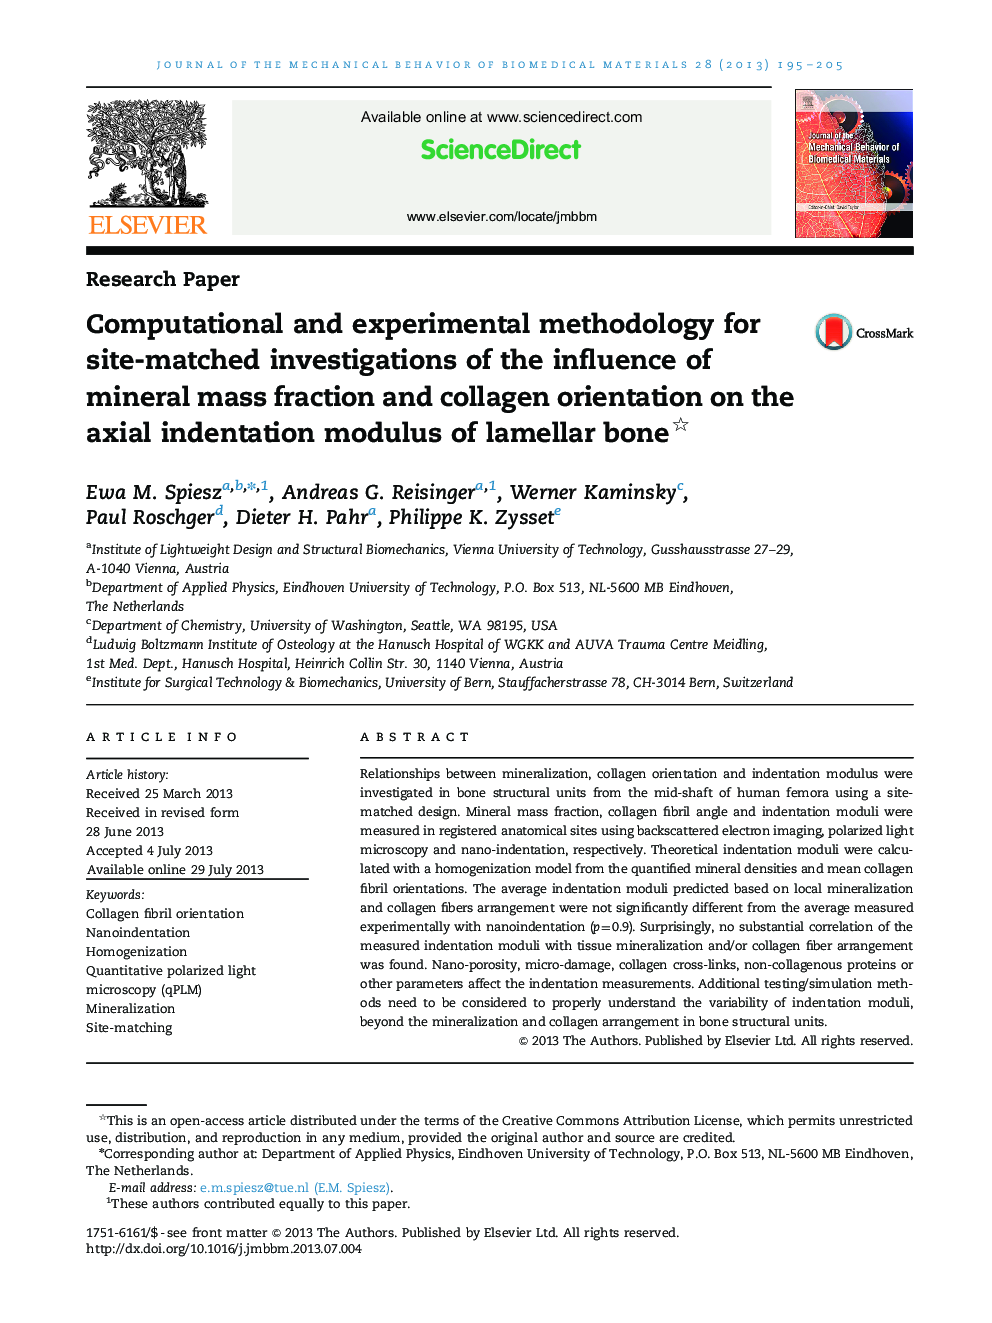 Computational and experimental methodology for site-matched investigations of the influence of mineral mass fraction and collagen orientation on the axial indentation modulus of lamellar bone